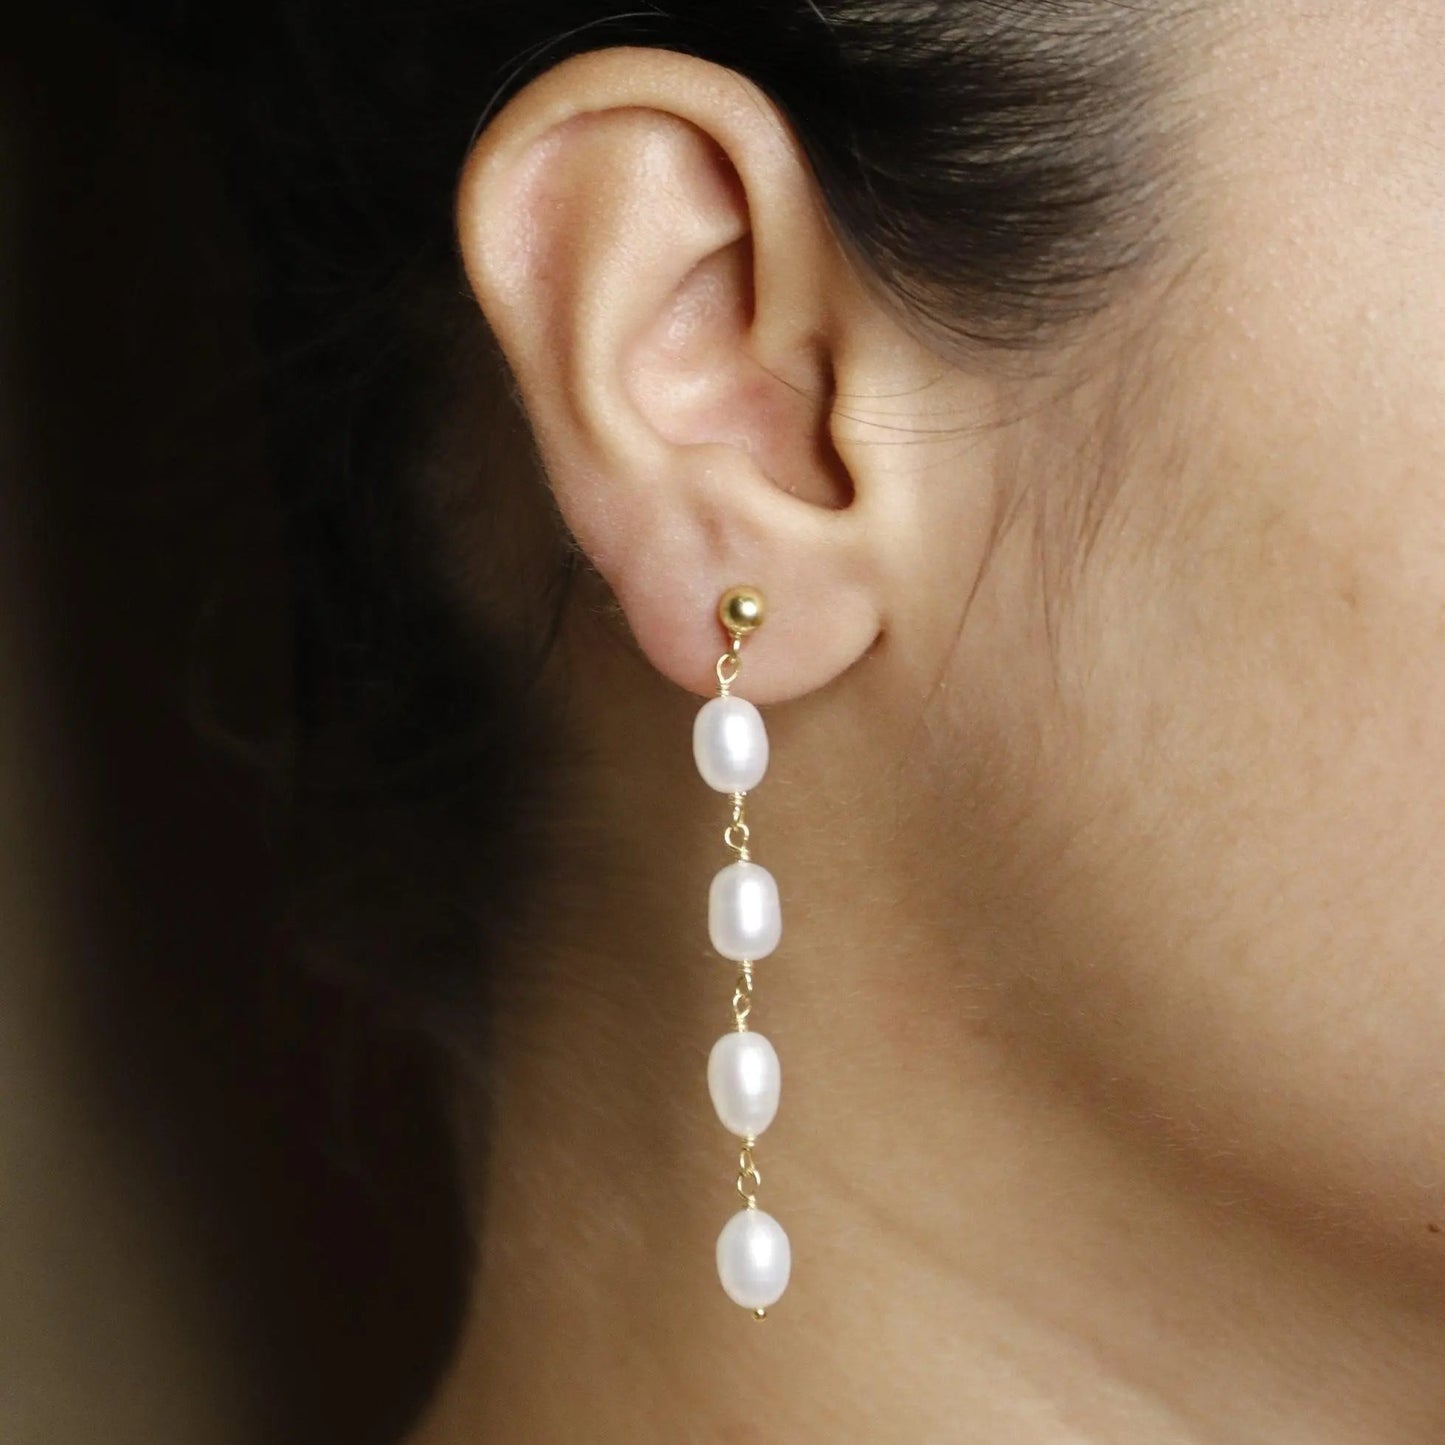 Glistening Pearl Drops Silver Earrings - From Purl Purl